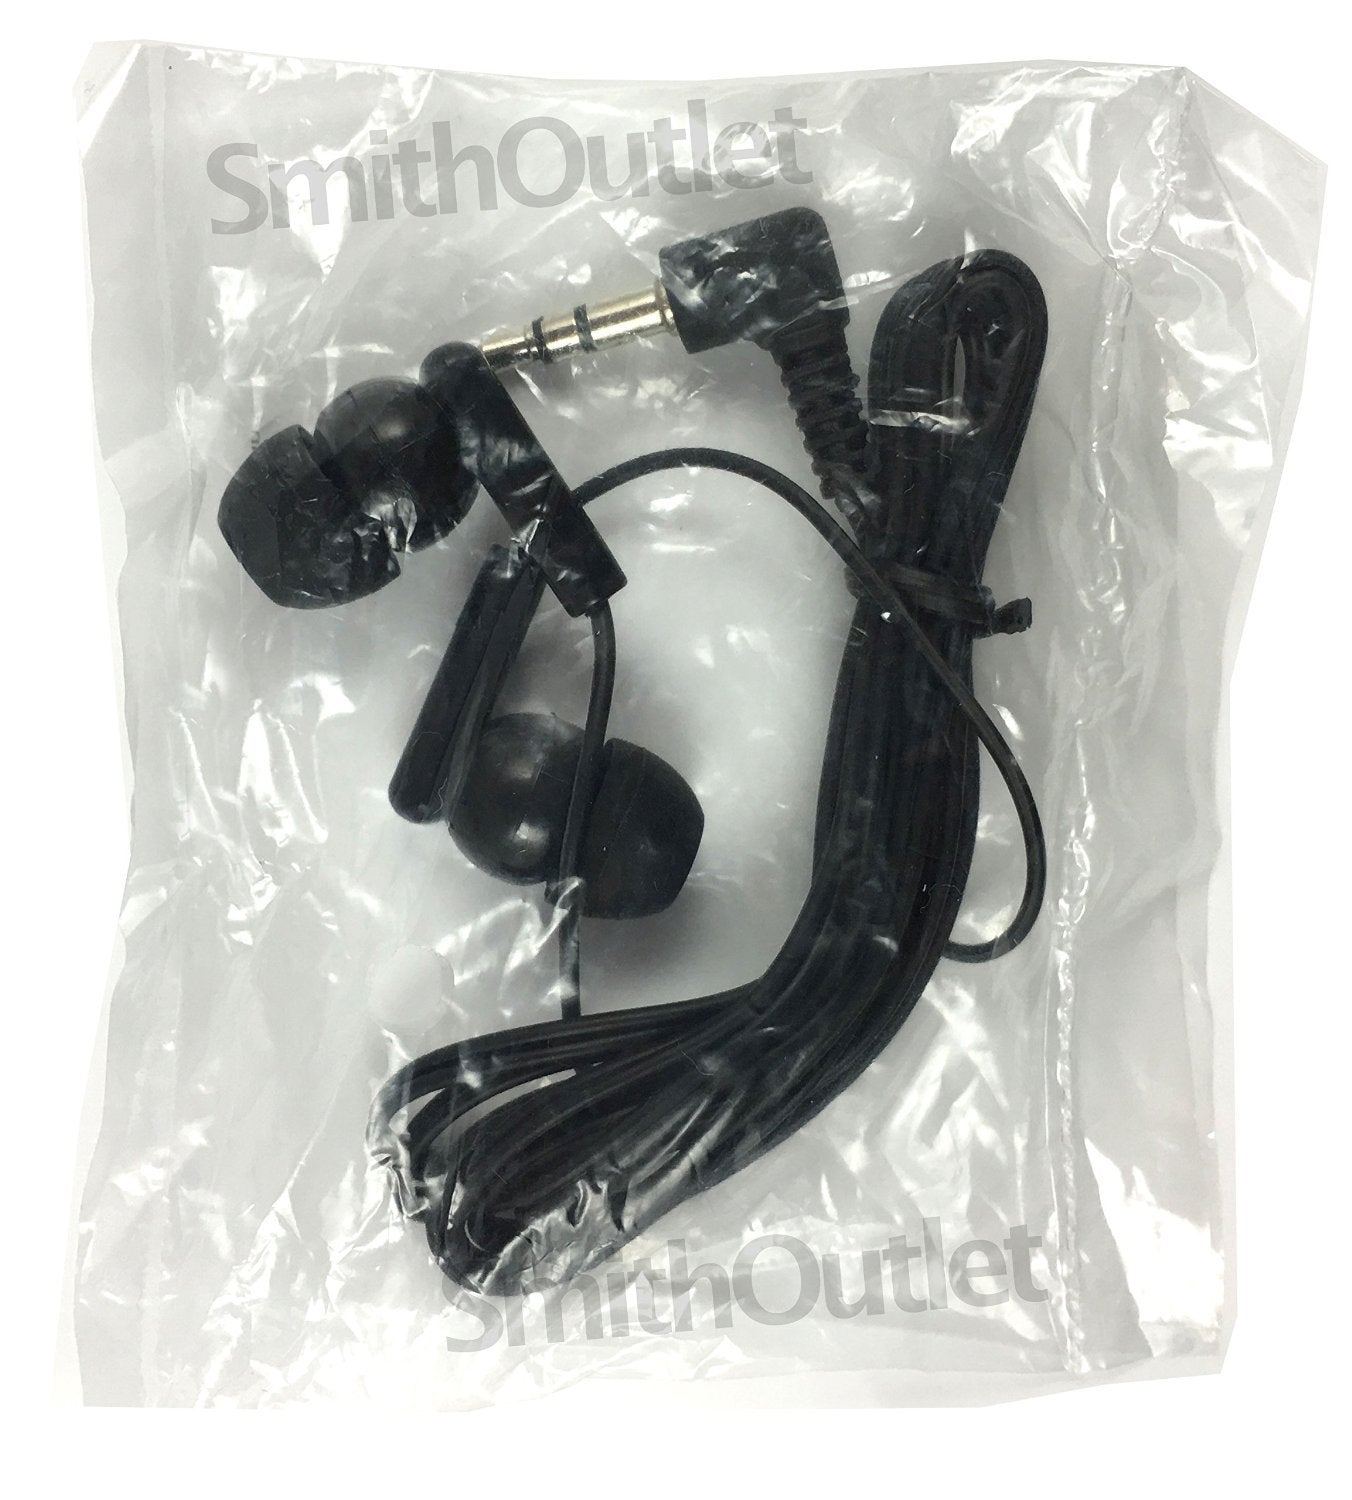 Detailed view of individual earbud packaging for classroom use